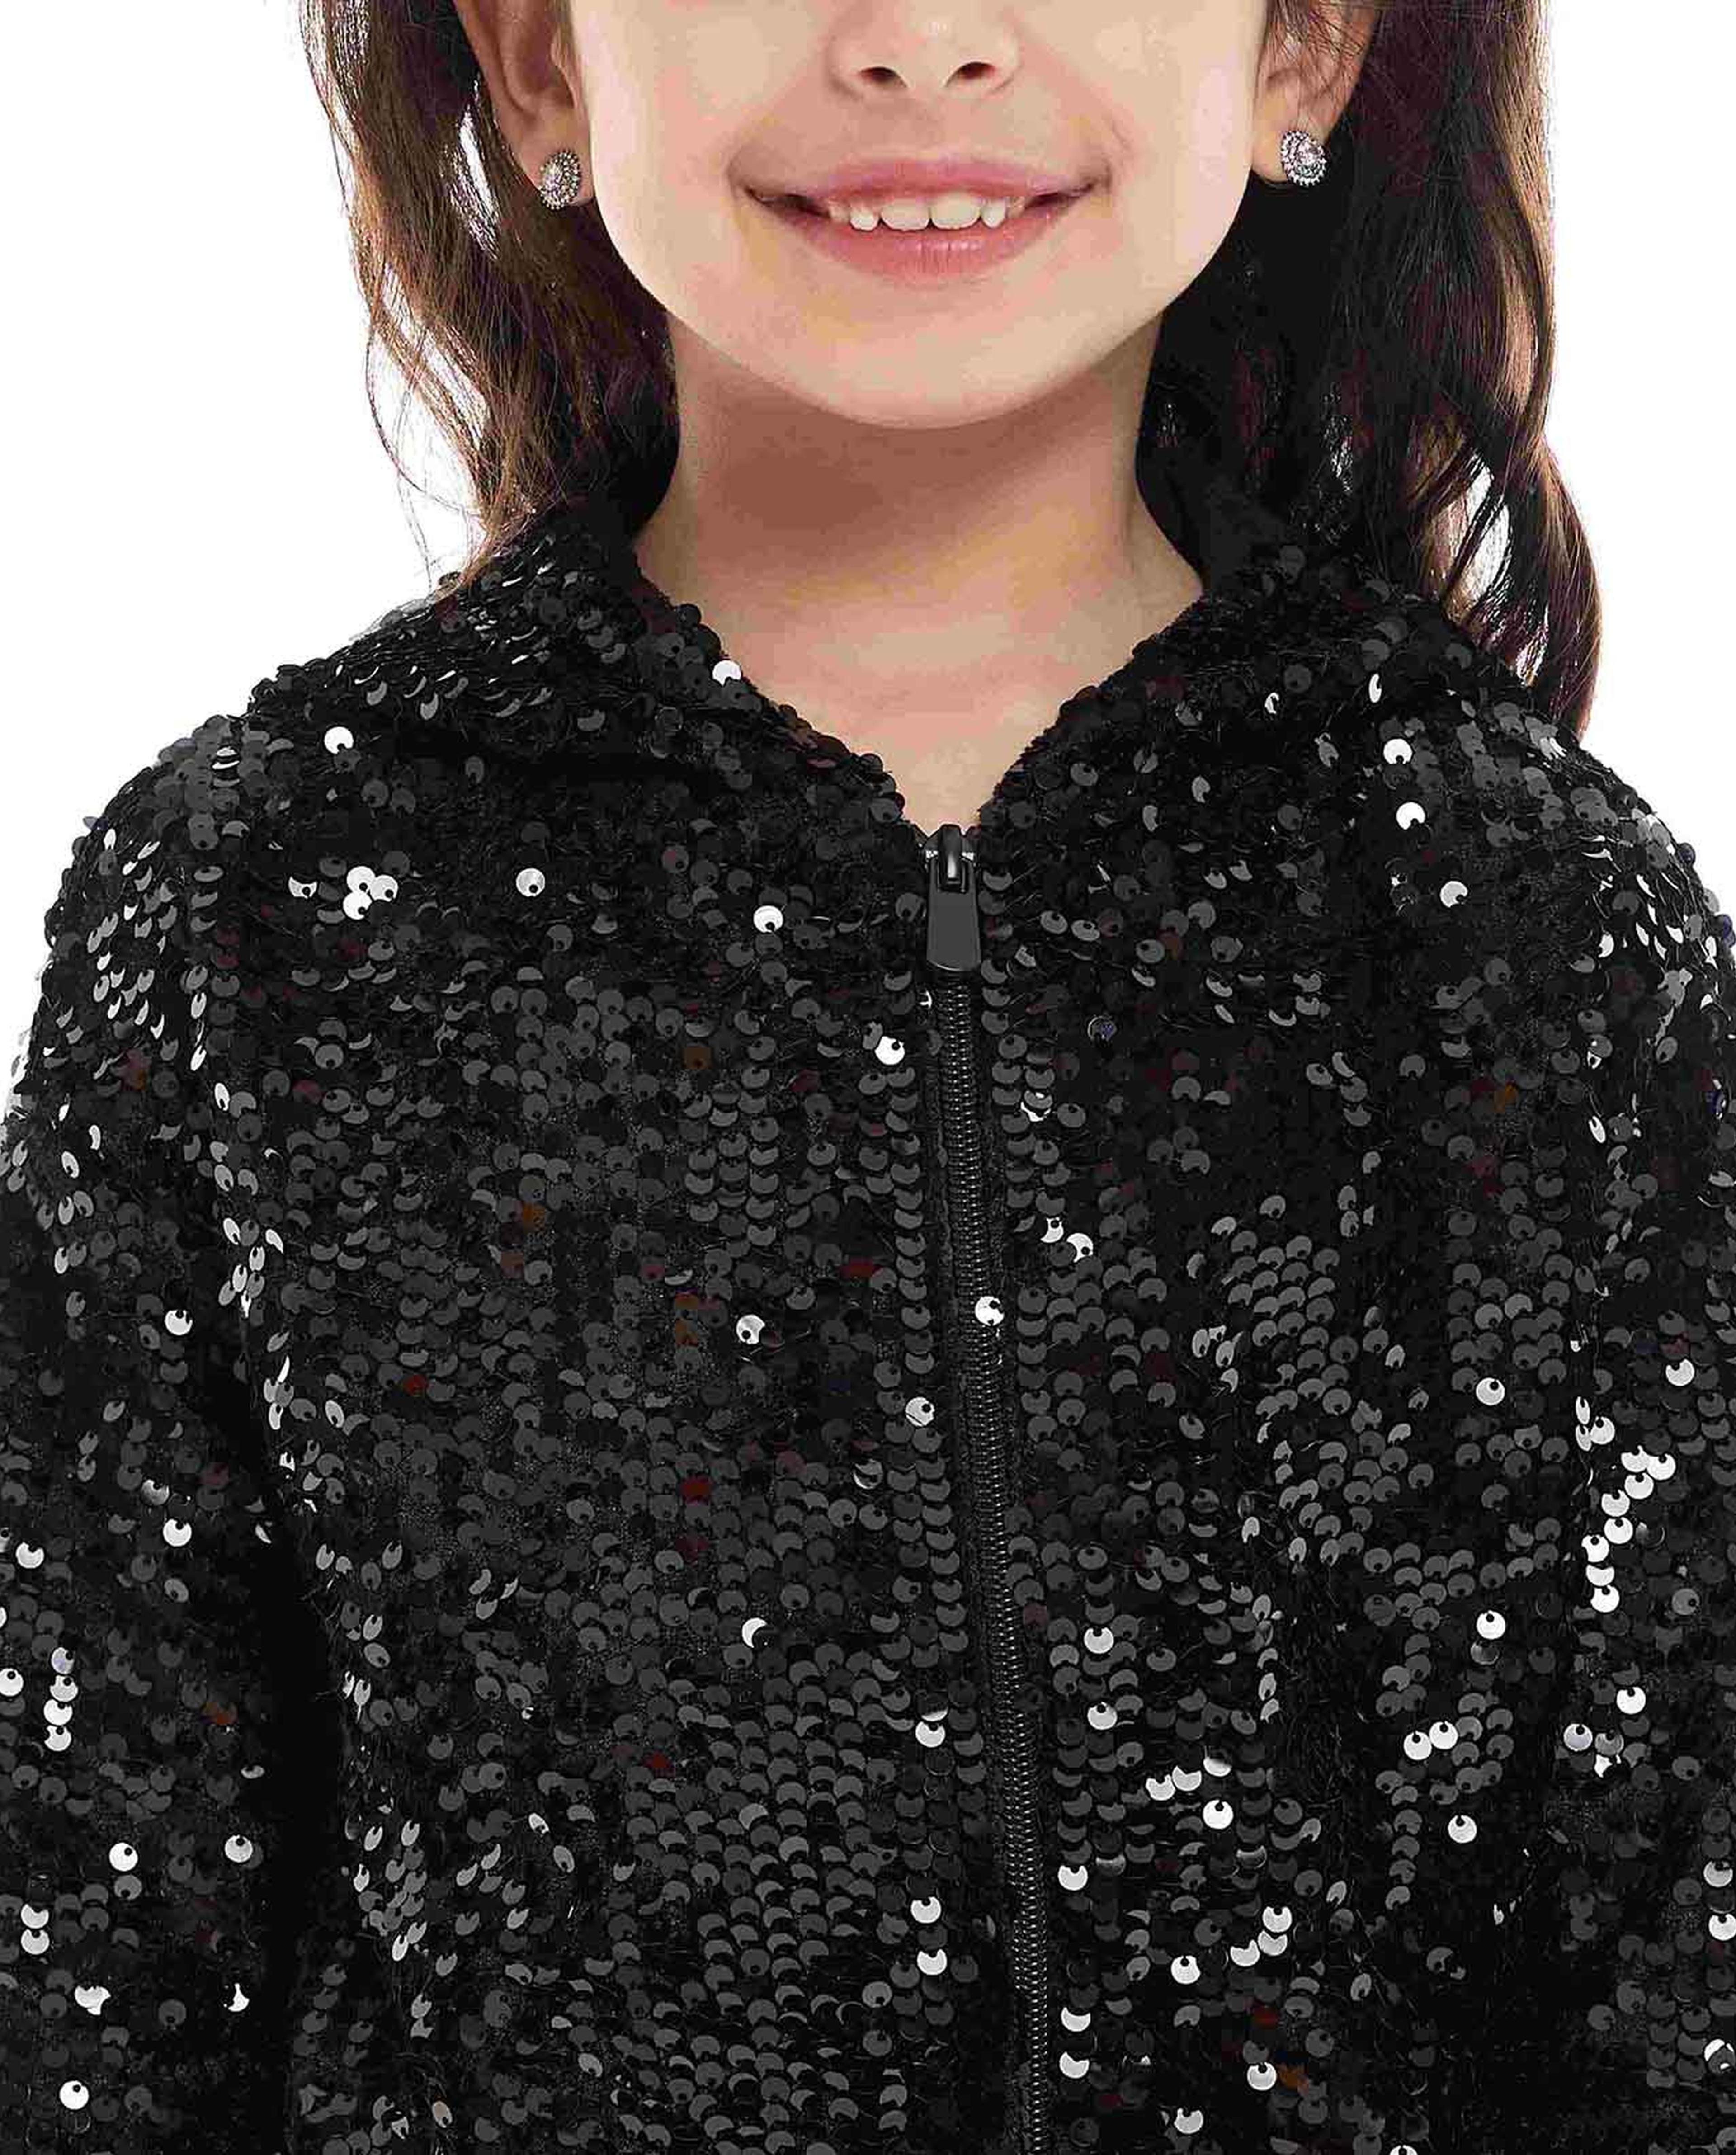 Sequined Hooded Jacket with Zipper Closure